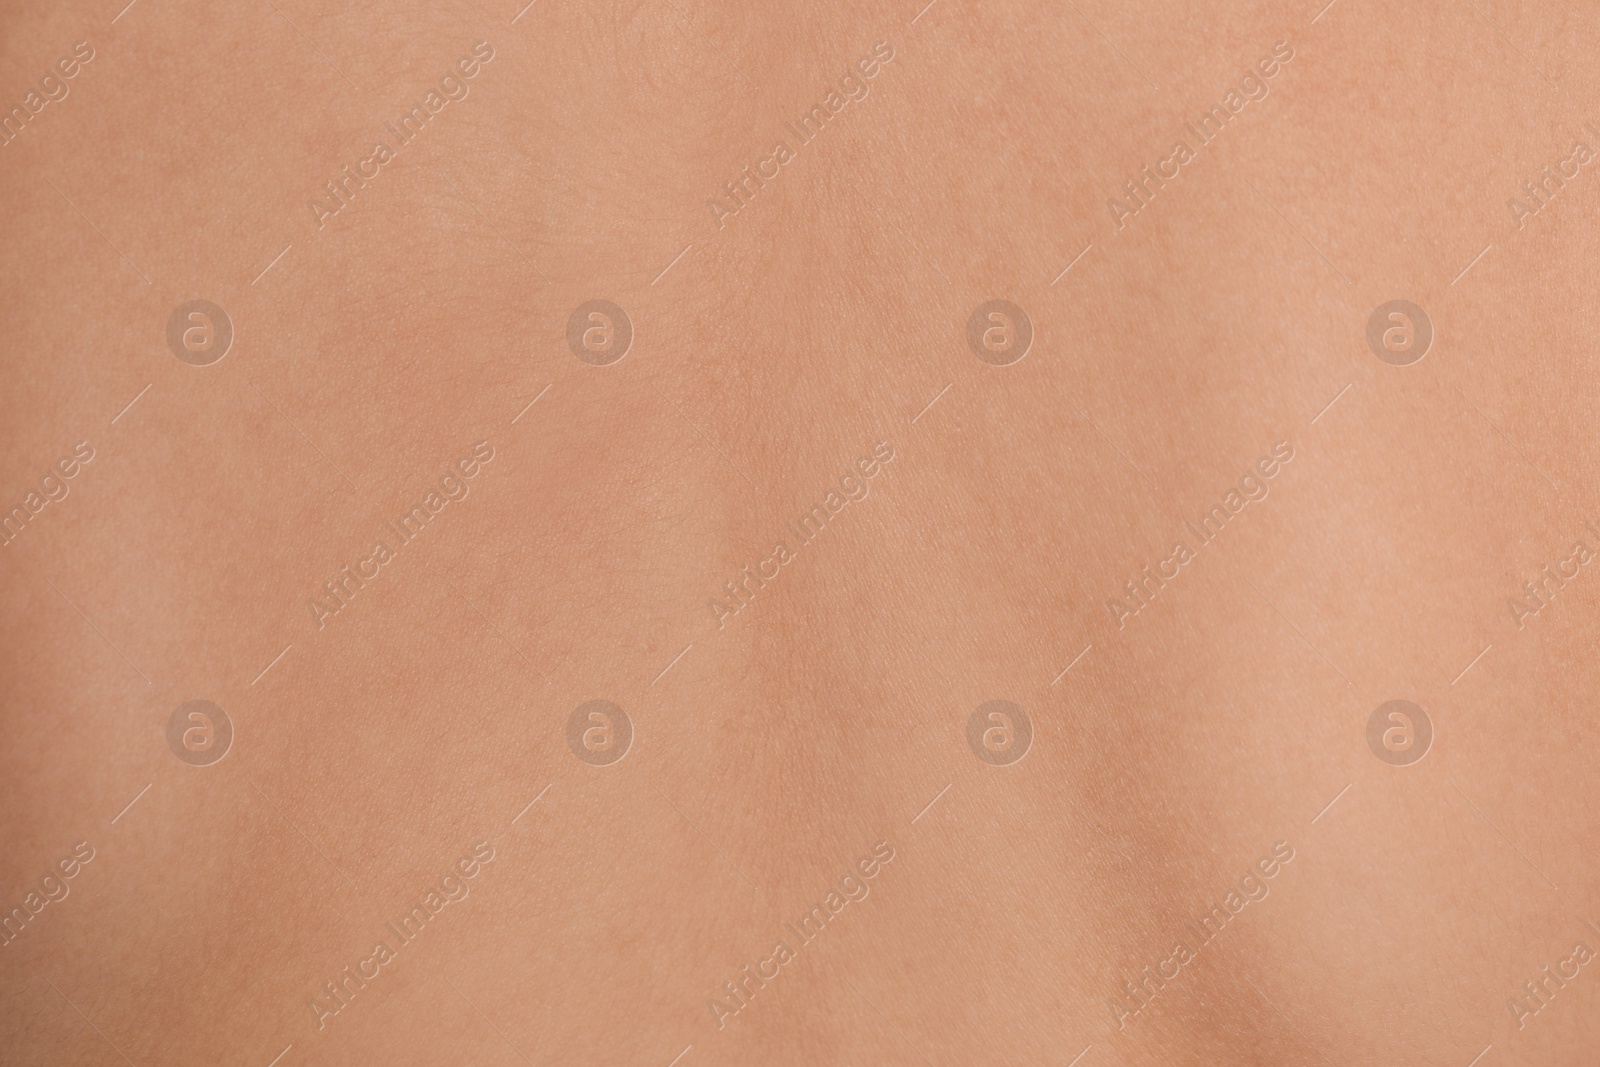 Photo of Human skin without birthmarks as background, closeup view